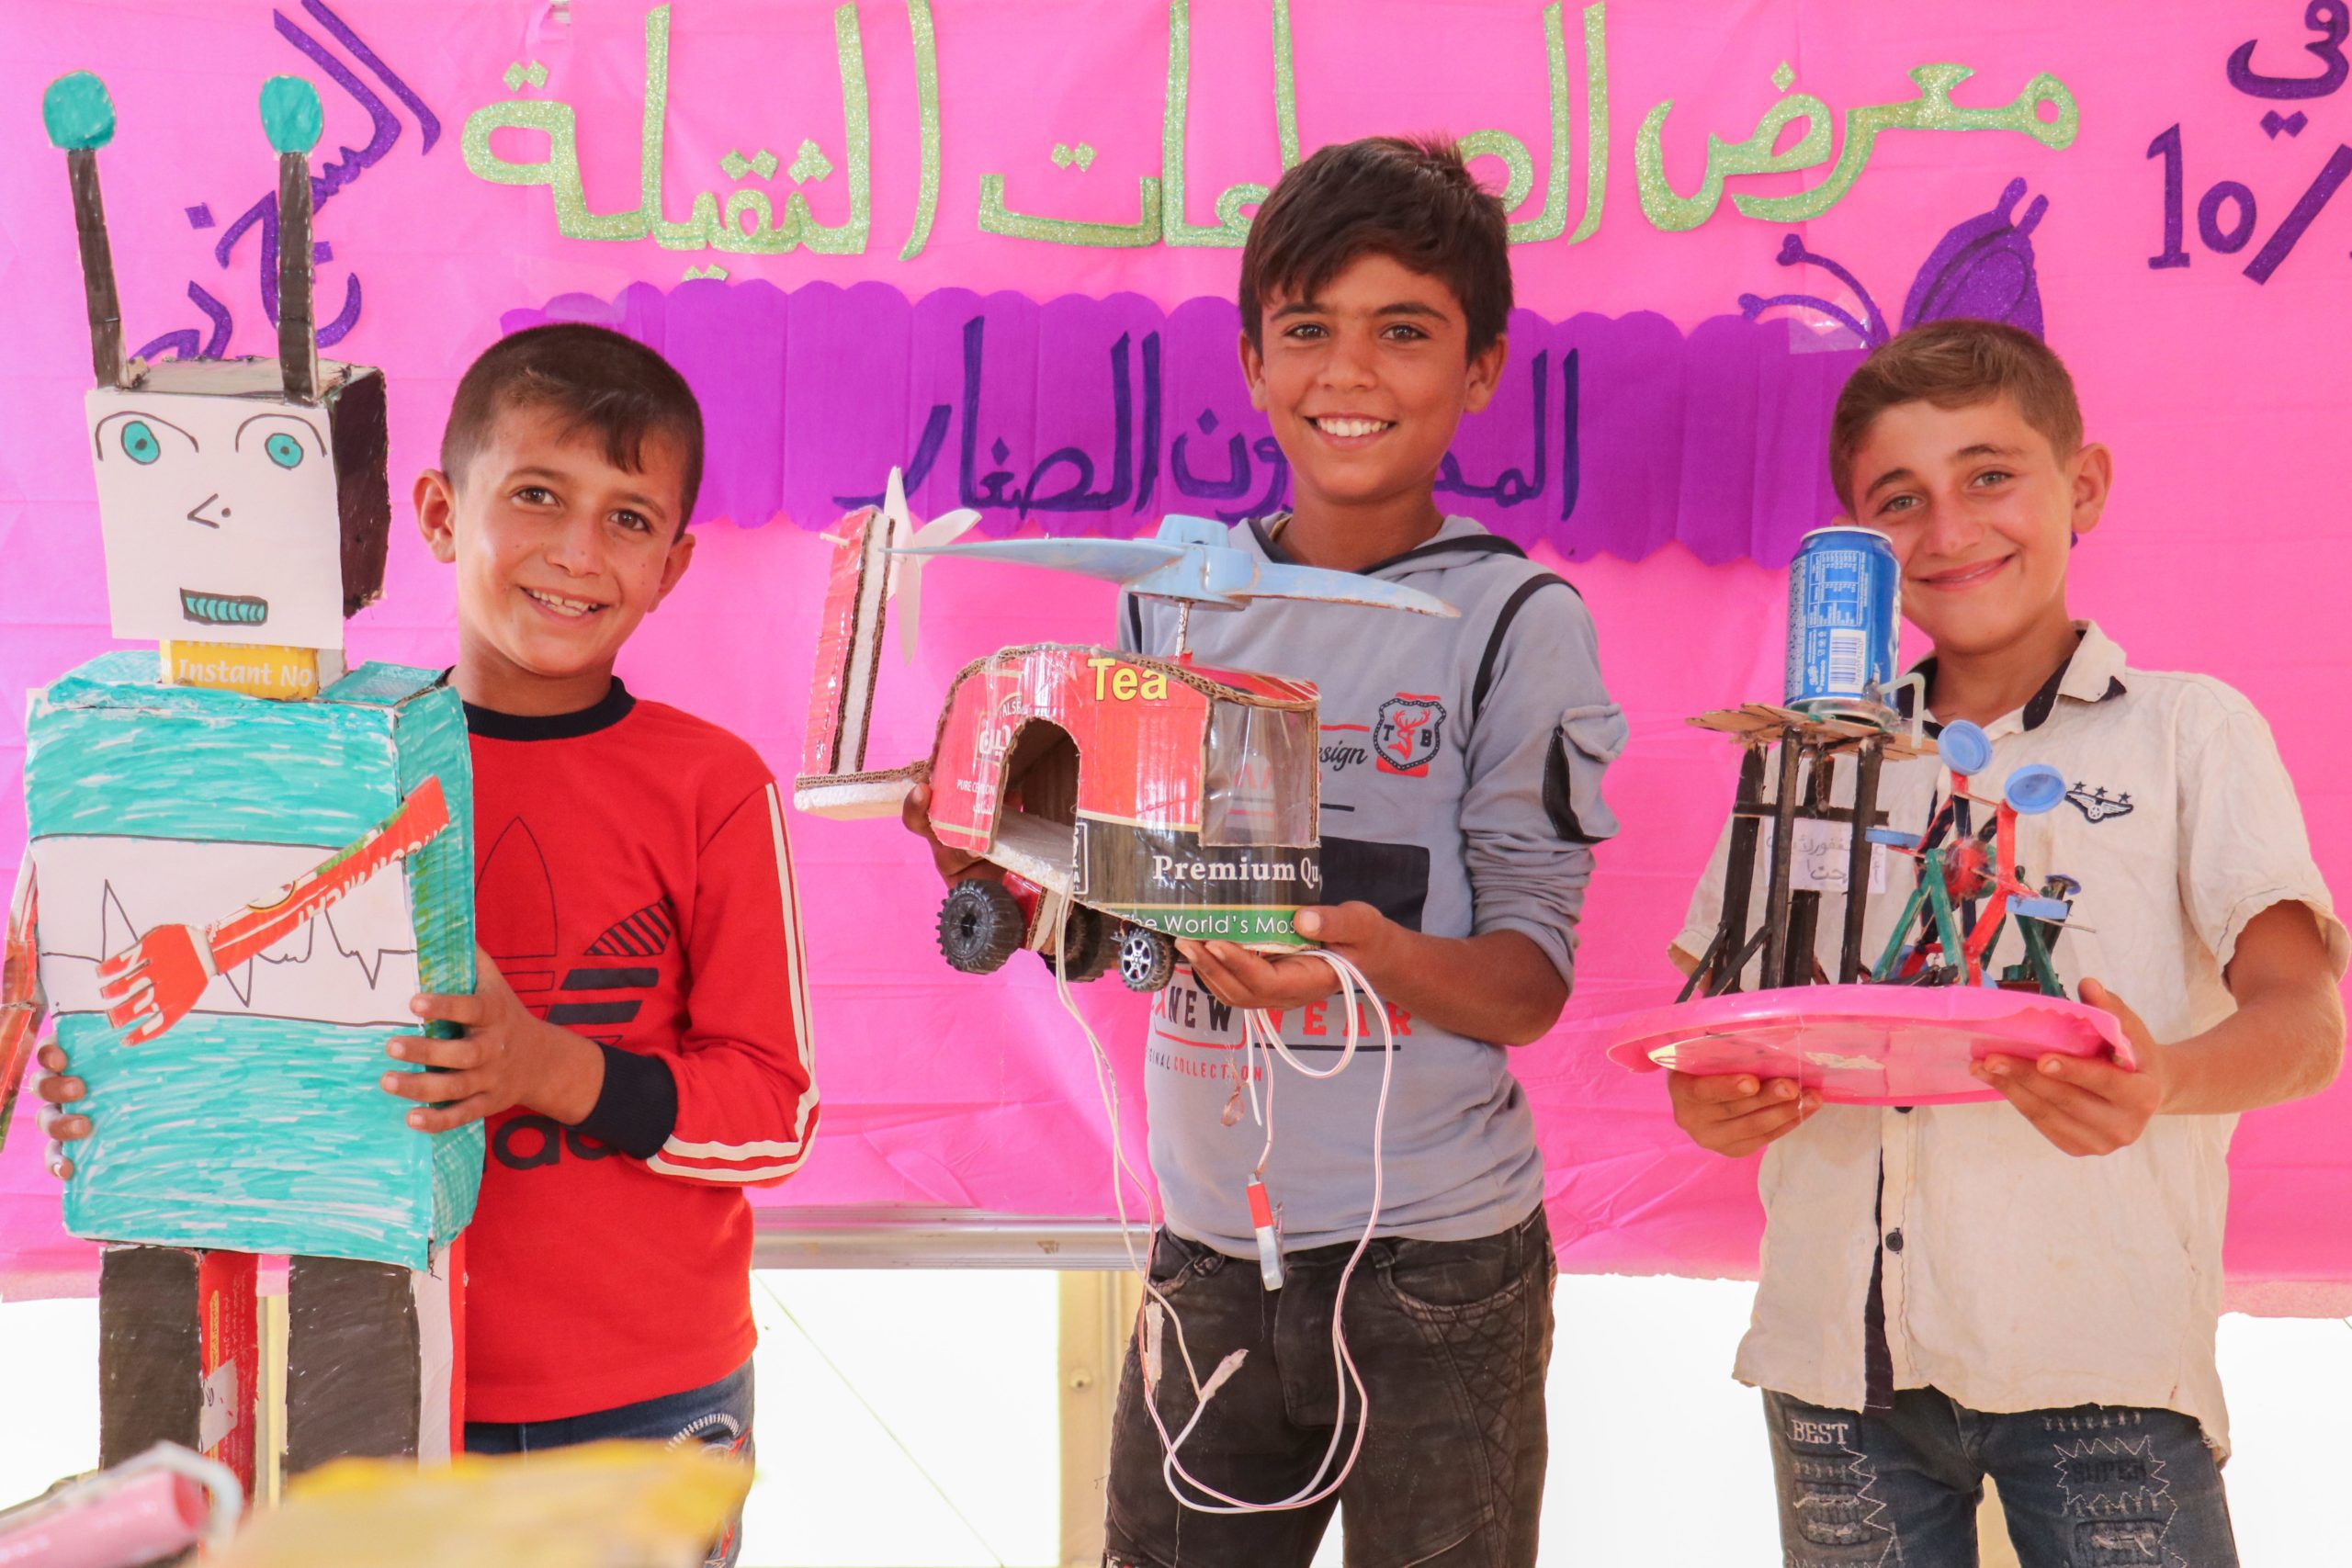 Empowering education for children through shelter in Syria